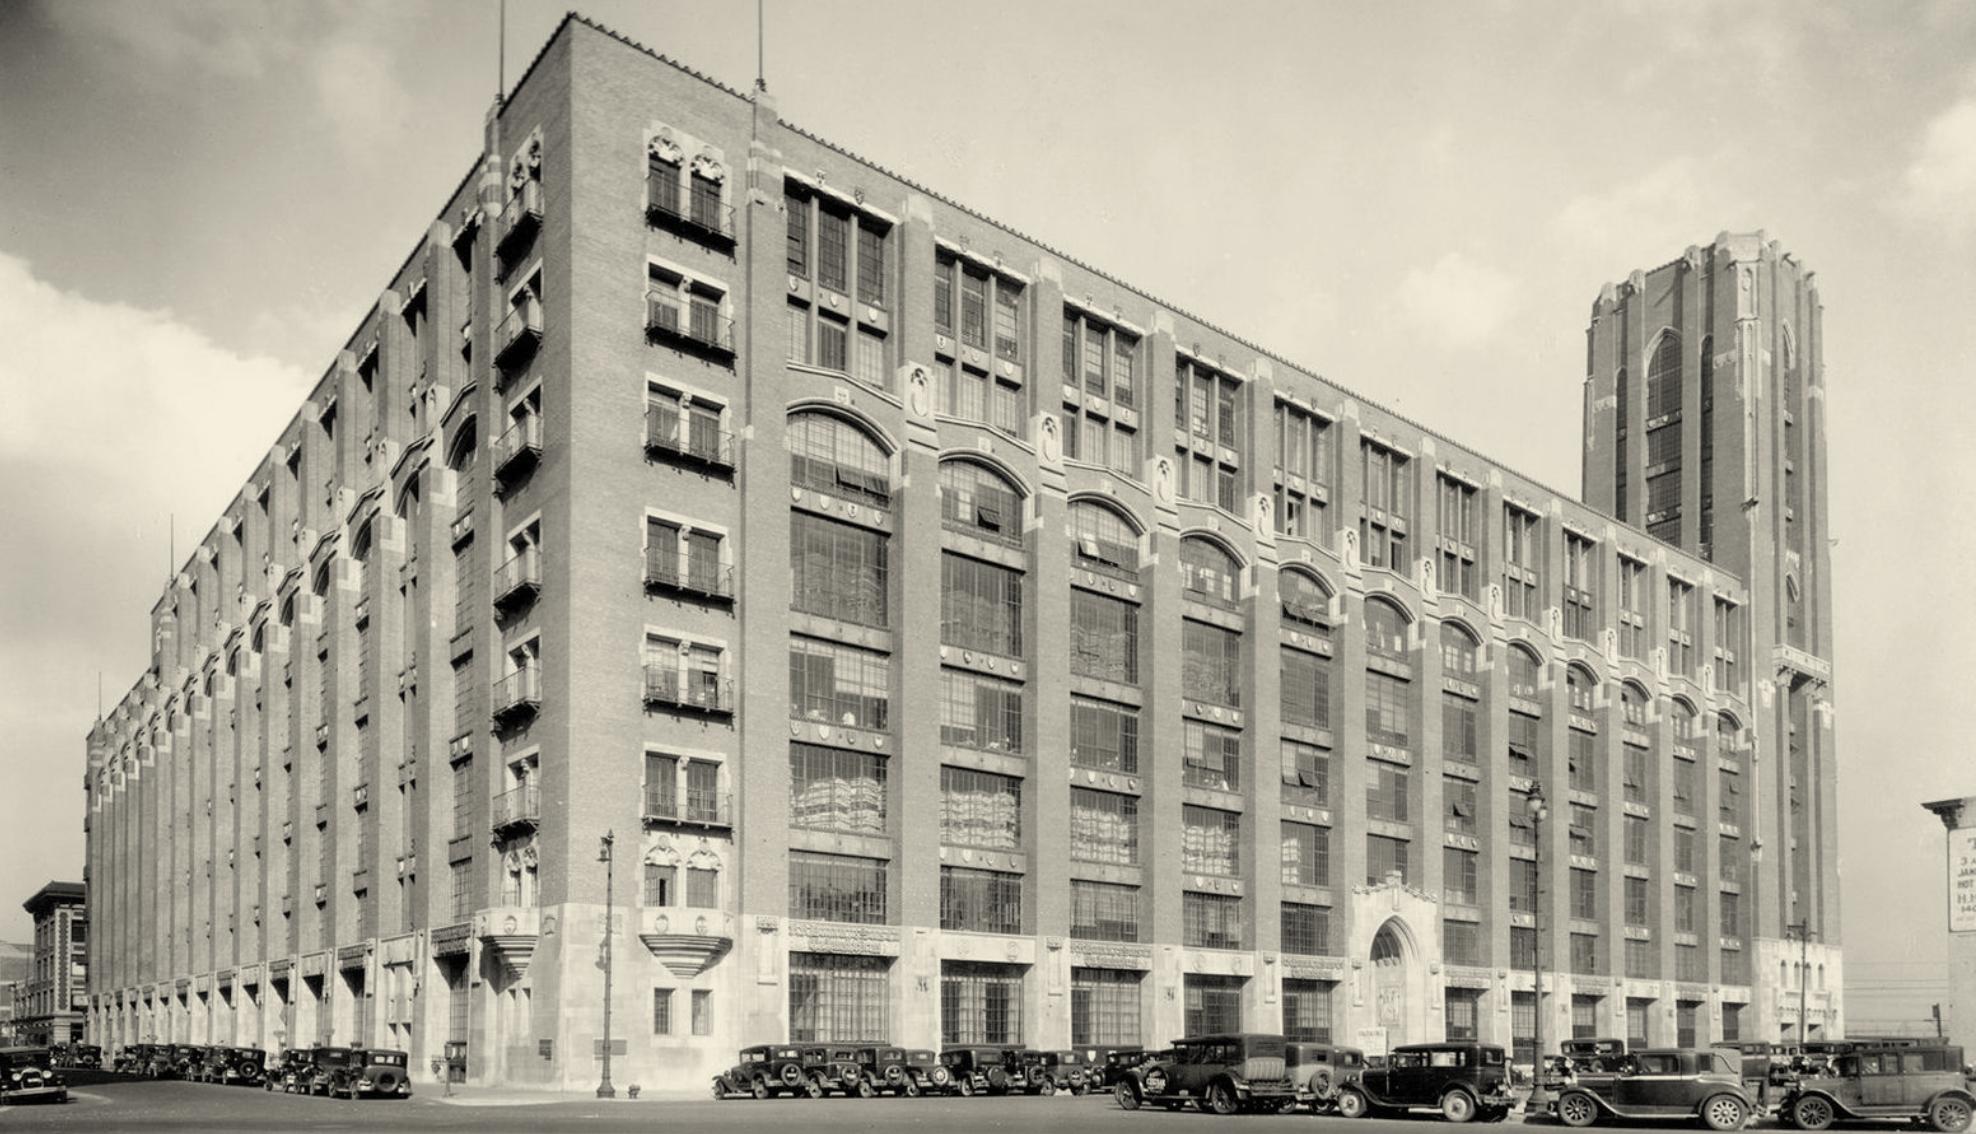 R.R. Donnelley & Sons printing plant 